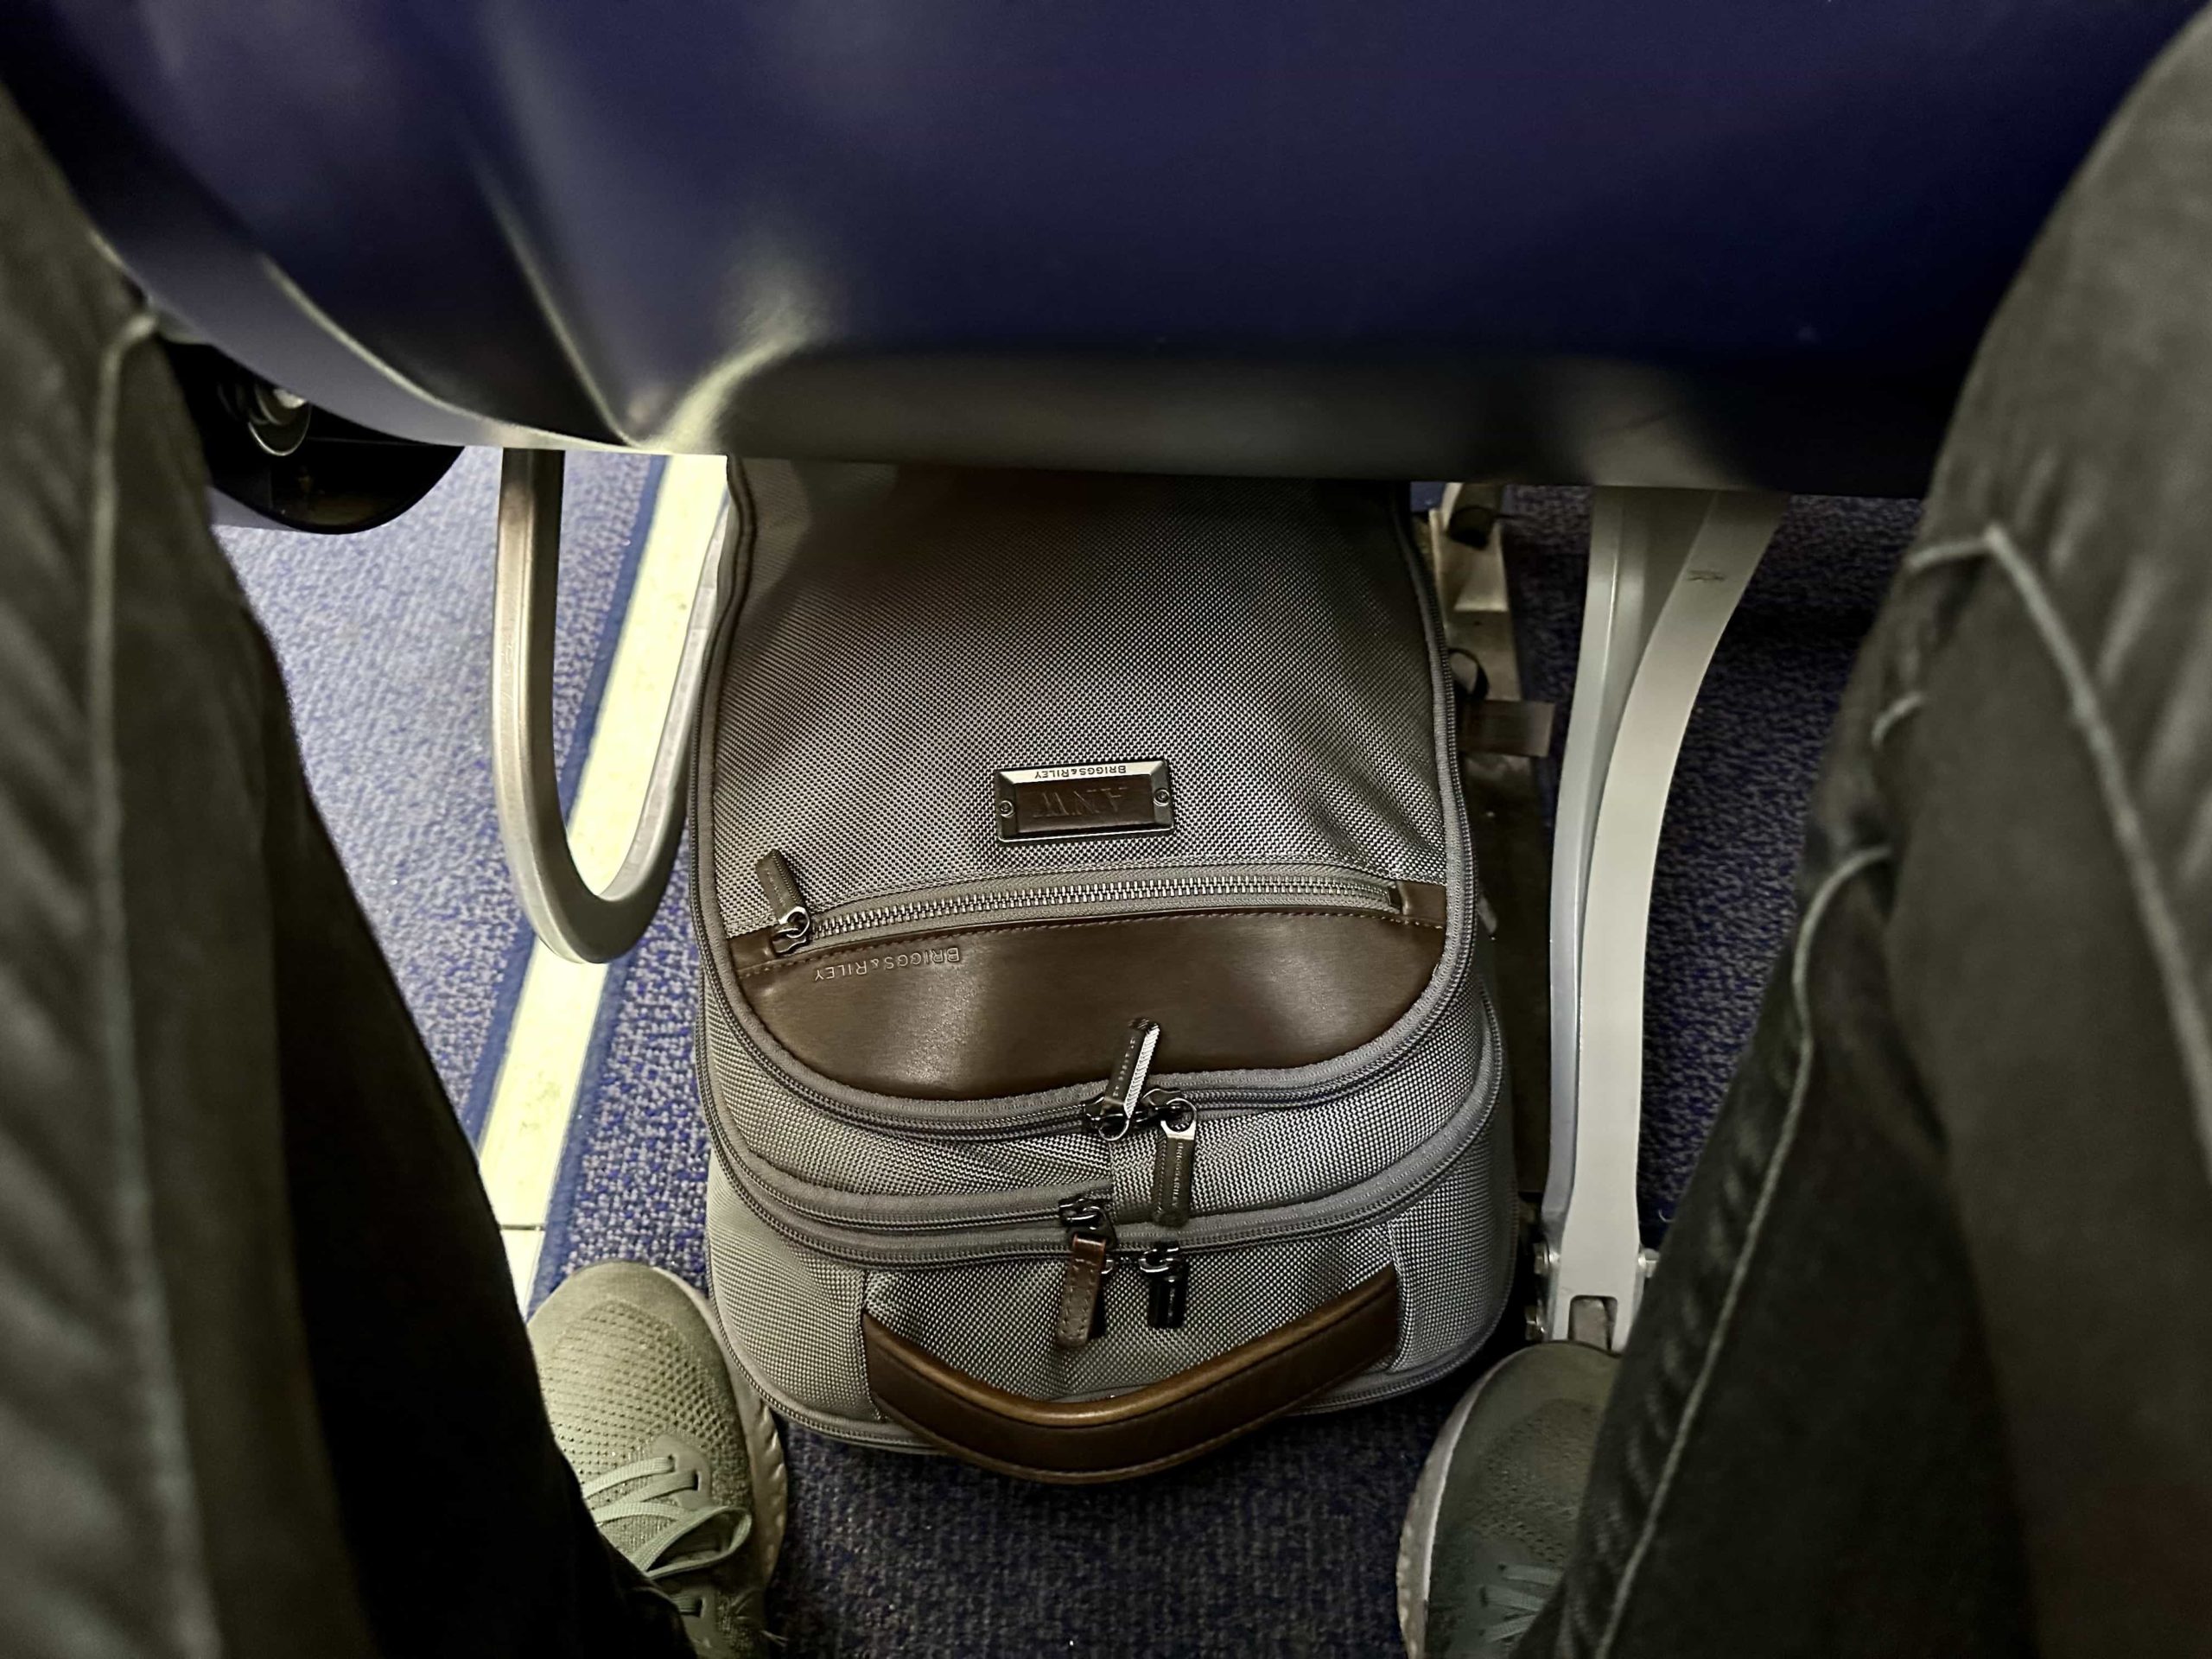 A backpack slotted underneath an economy-class plane seat